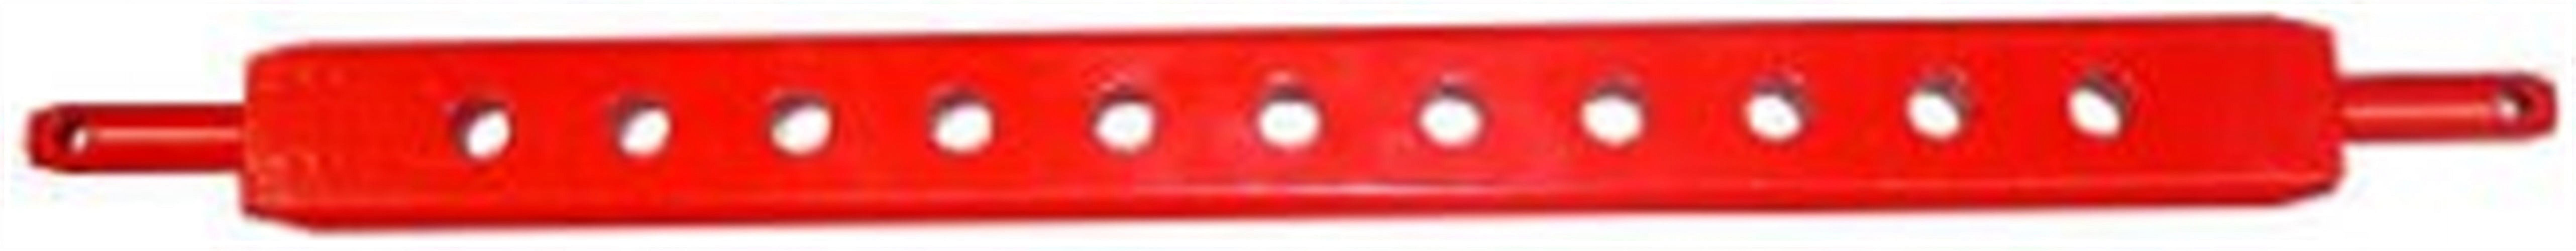 Speeco 04010100-10411 Tractor Drawbar- 1 x 2.5 In. - image 2 of 2